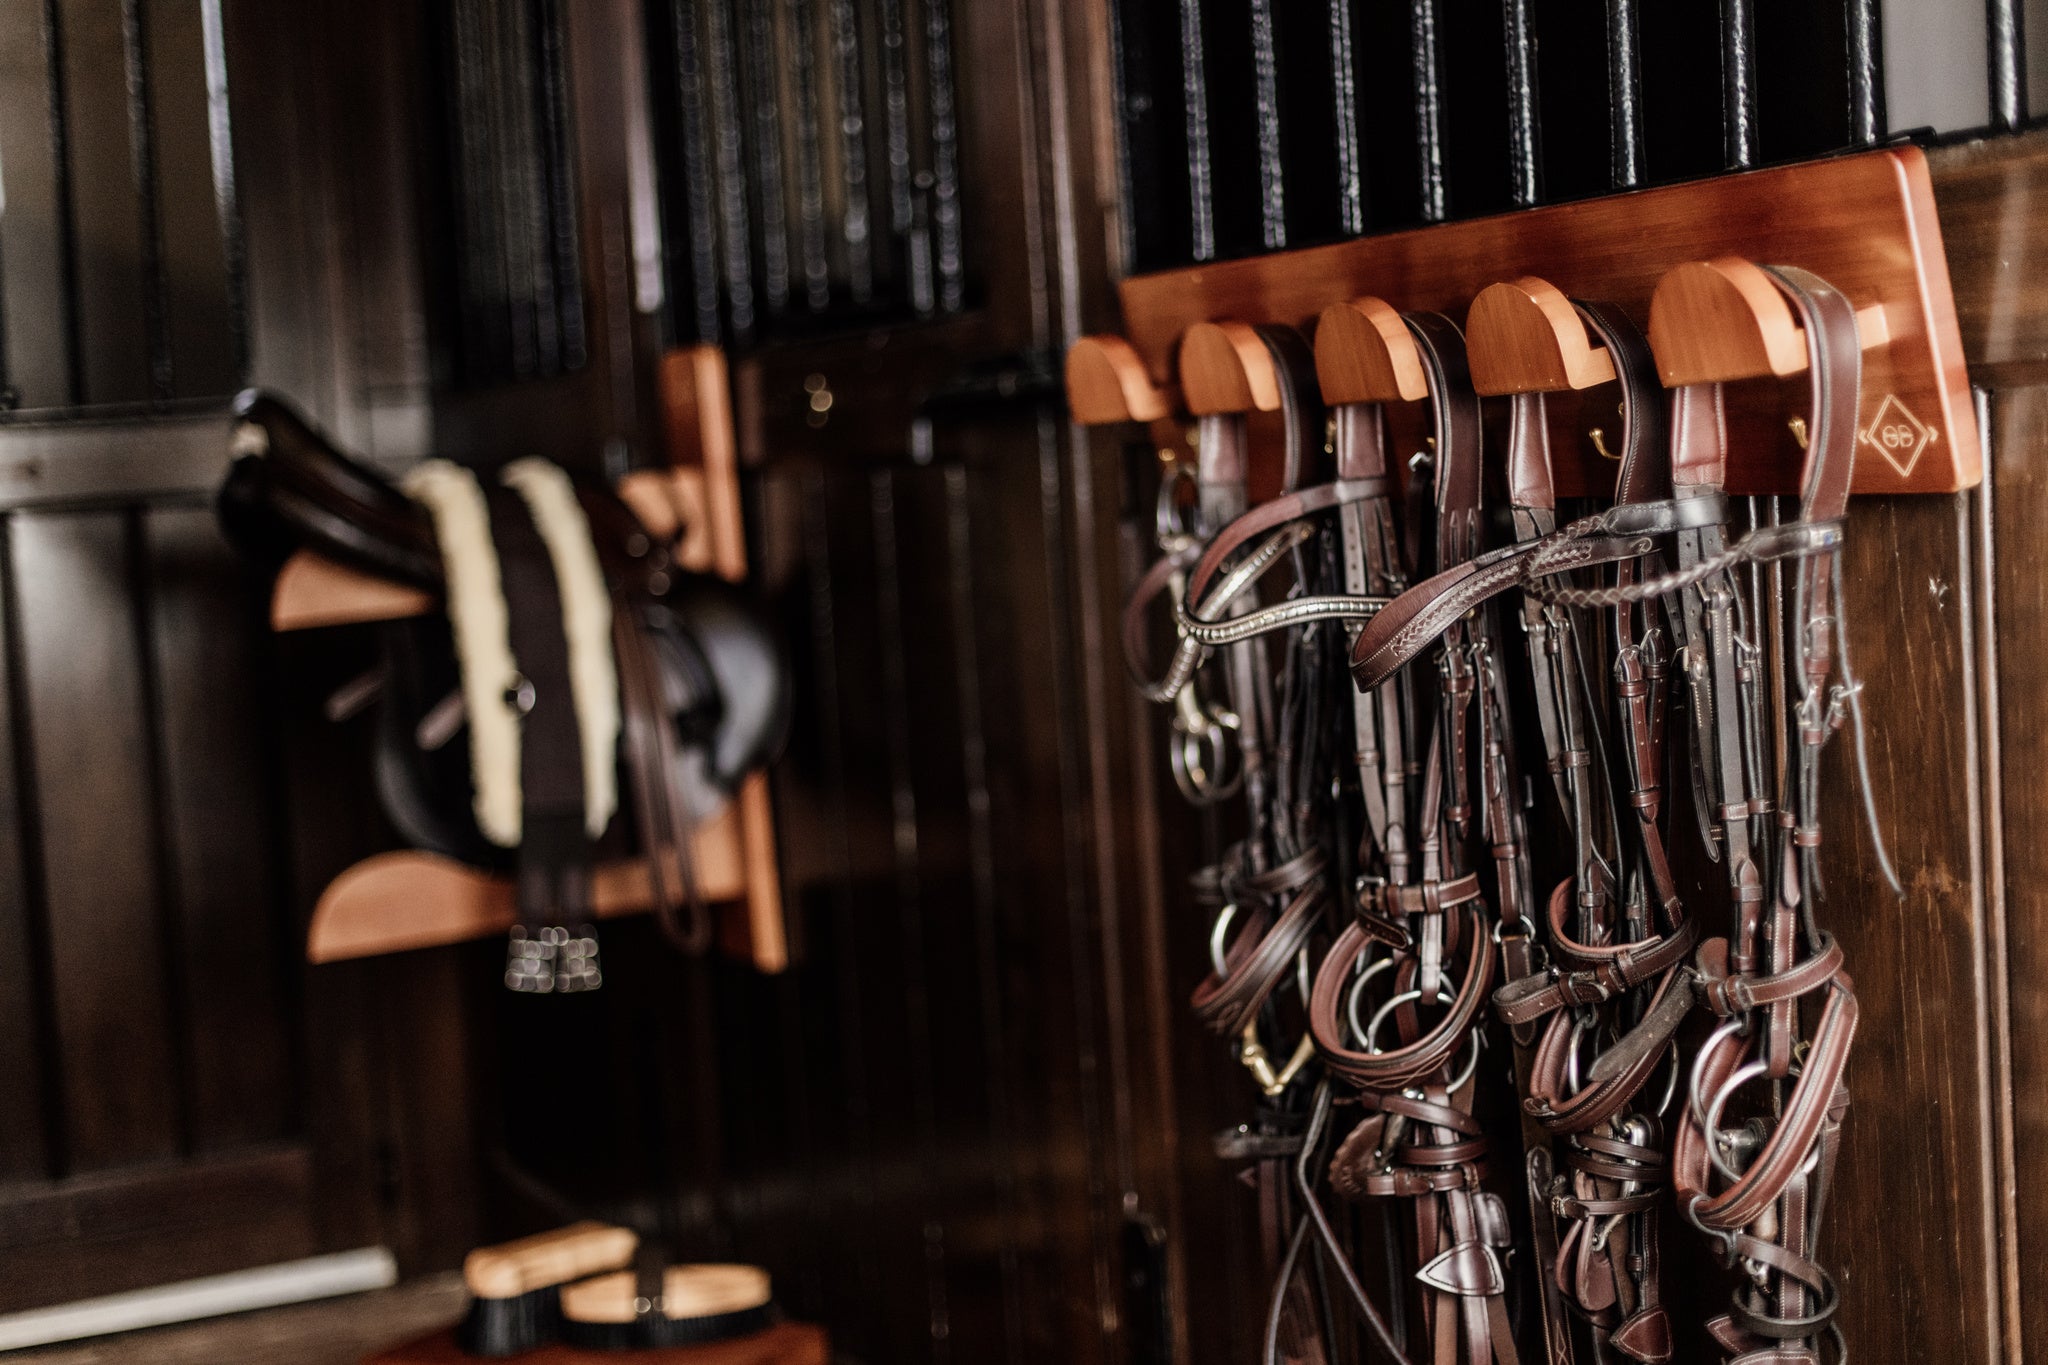 The Kentucky Bridle Rack will soon become a must have in your tack room! It is made out of bamboo which makes it extra resistant and easy to clean. It gives you space to hang 5 bridles or halters. The 5 extra golden hooks give this rack a classy look, as long as the possibility to hand breastplates or leads.